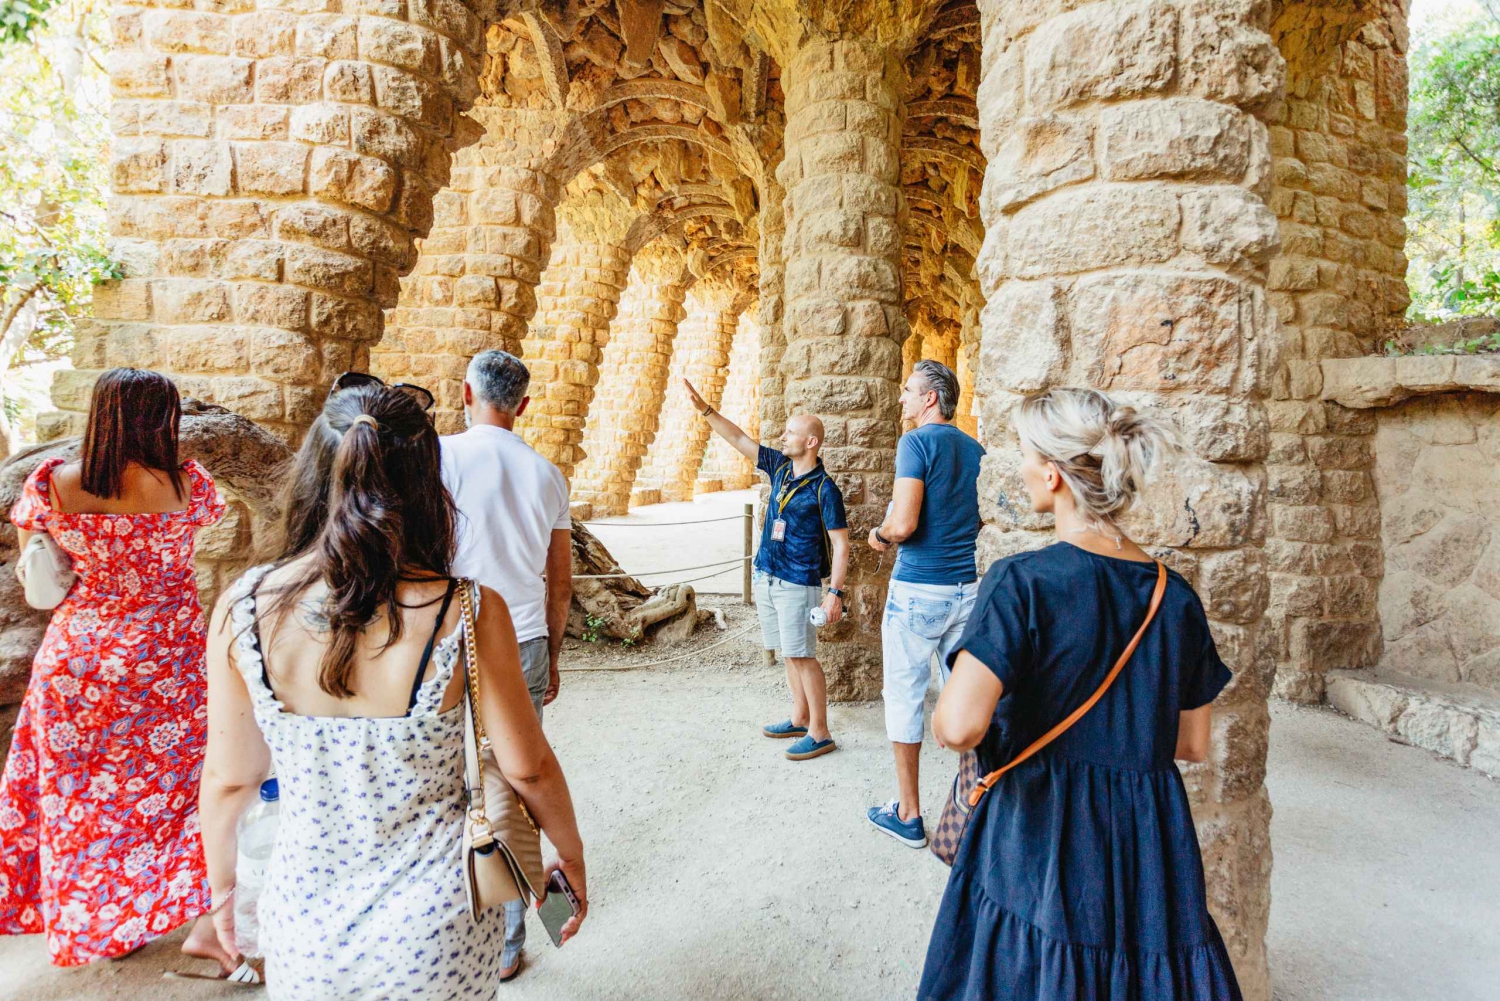 Barcelona: Park Güell Skip-the-Line Ticket and Guided Tour